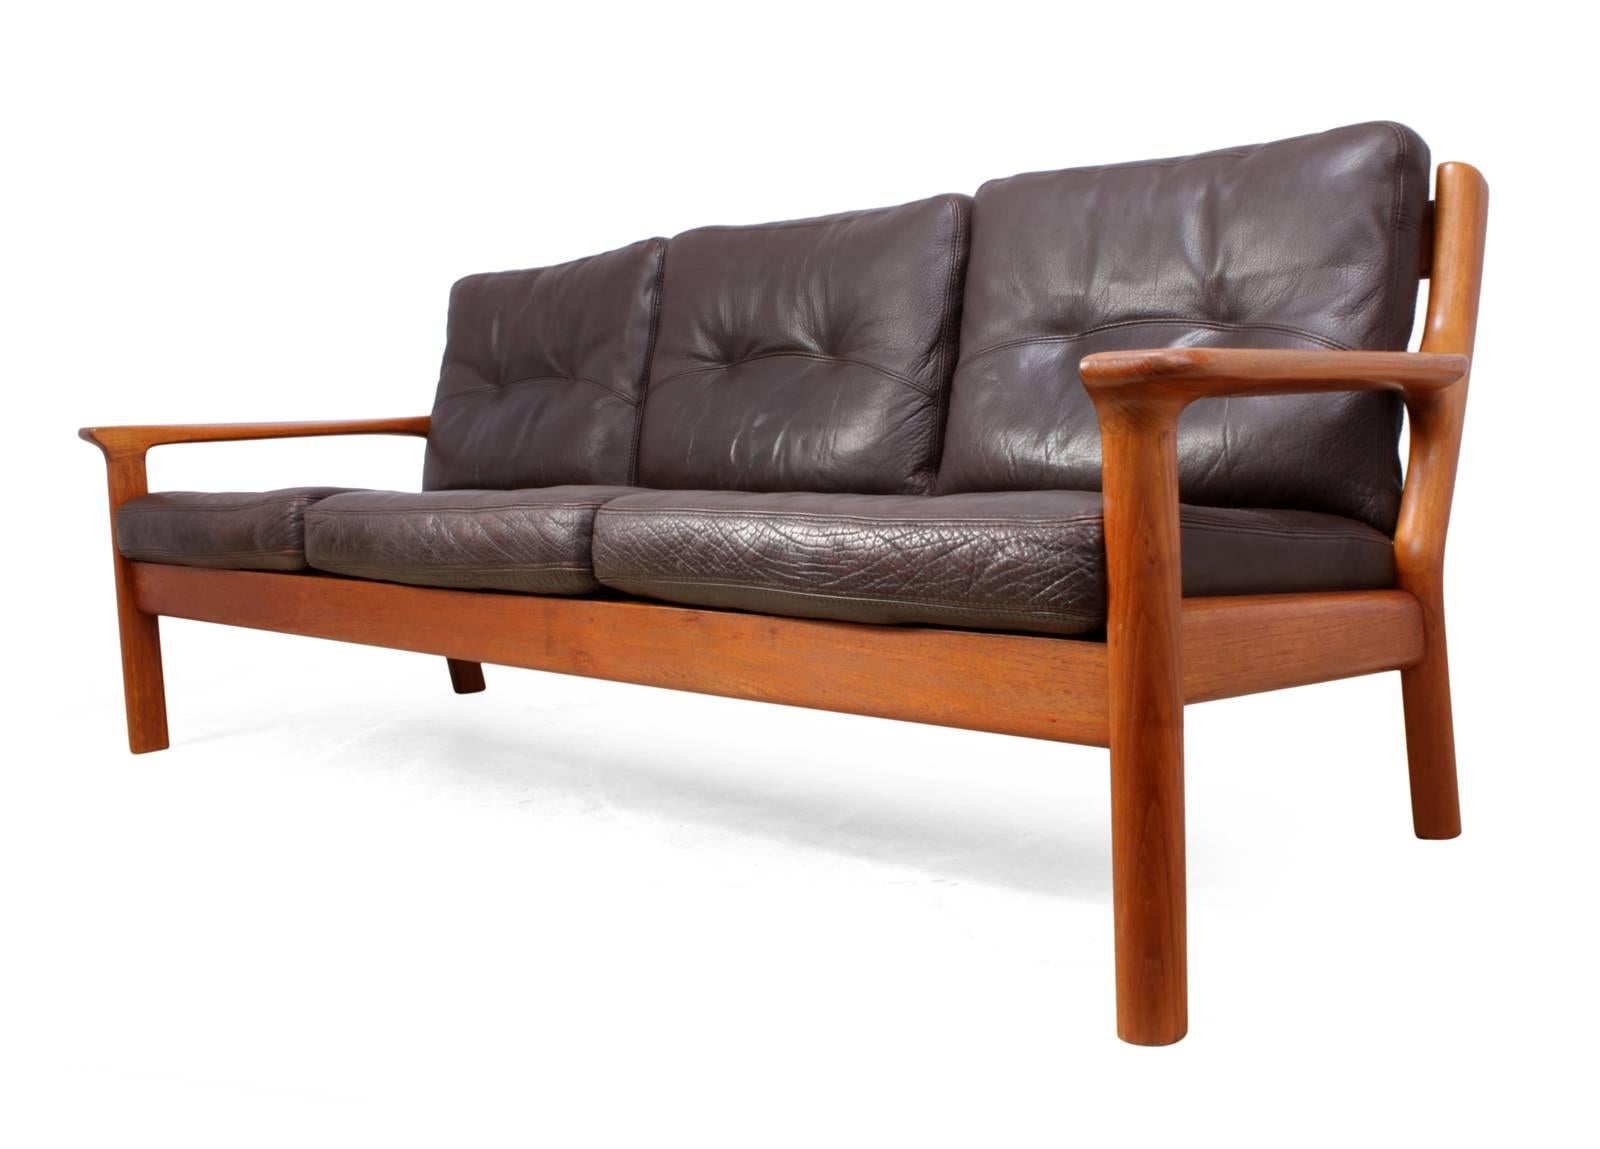 Midcentury Sofa in Teak and Leather by Glostrop 4